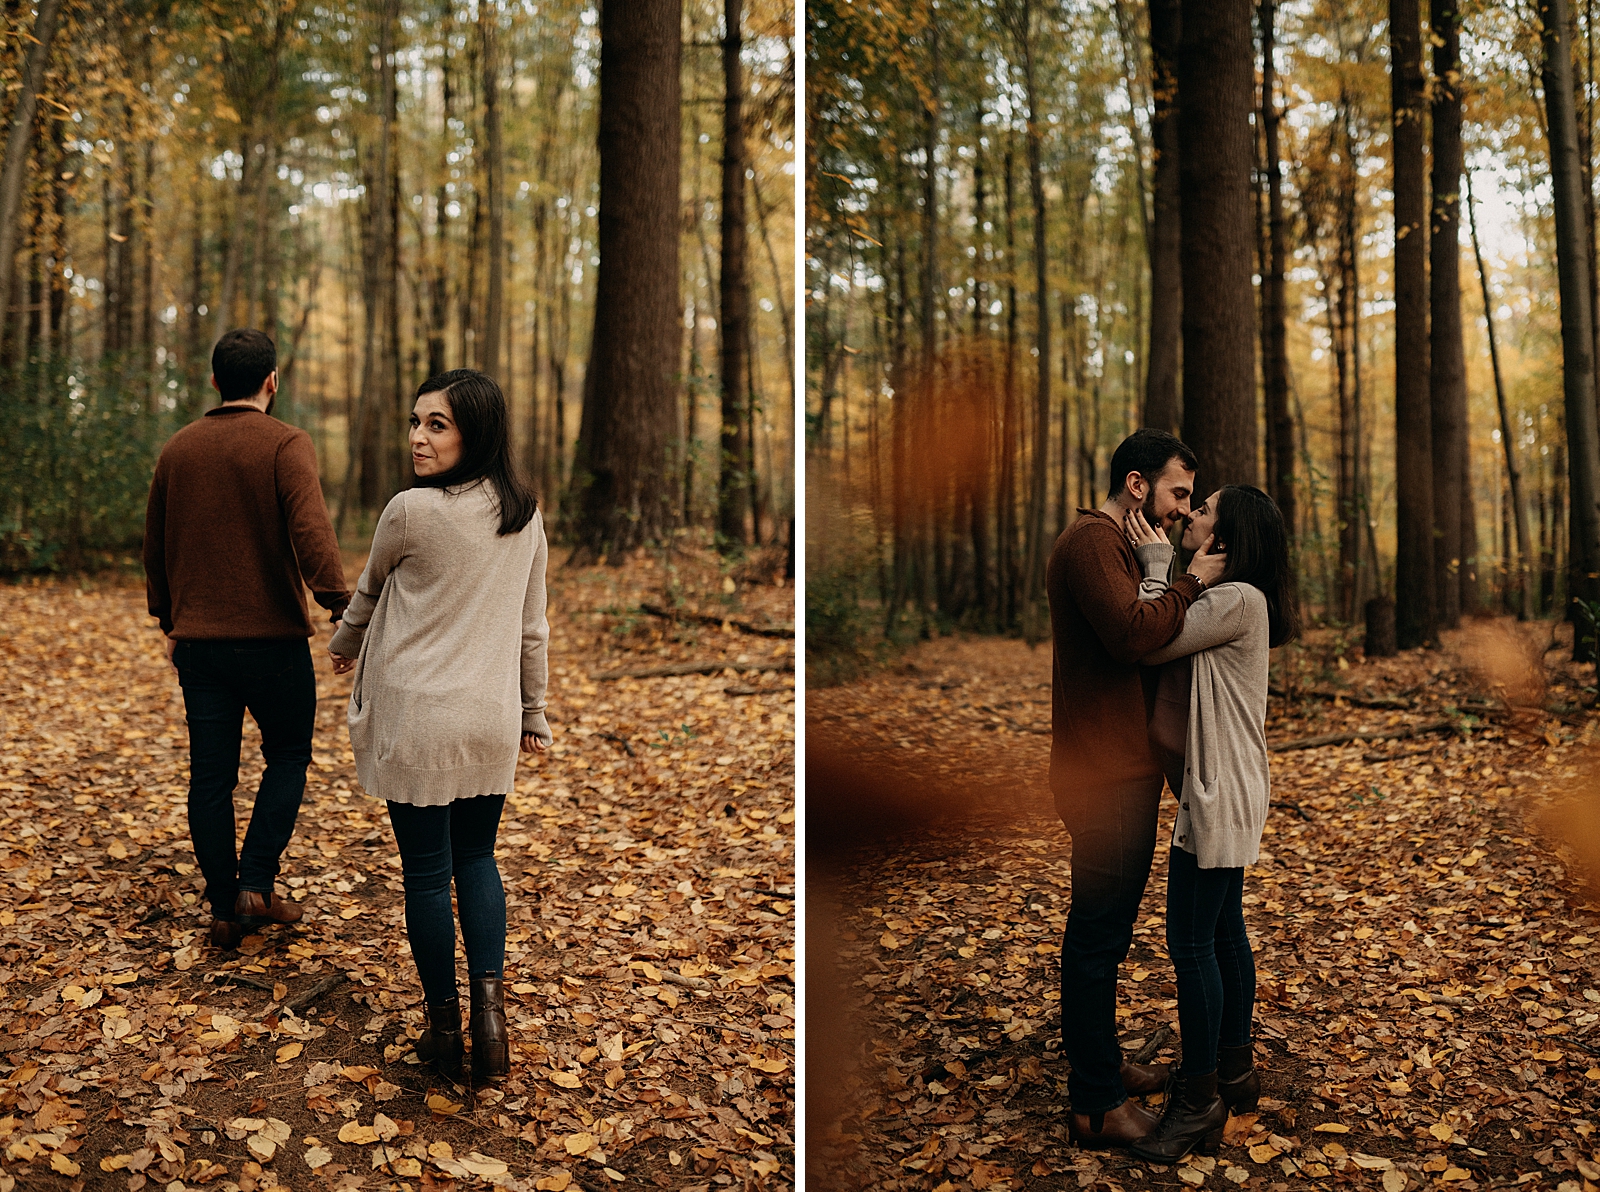 Couple holding hands with woman looking from behind with dead leafs on the ground